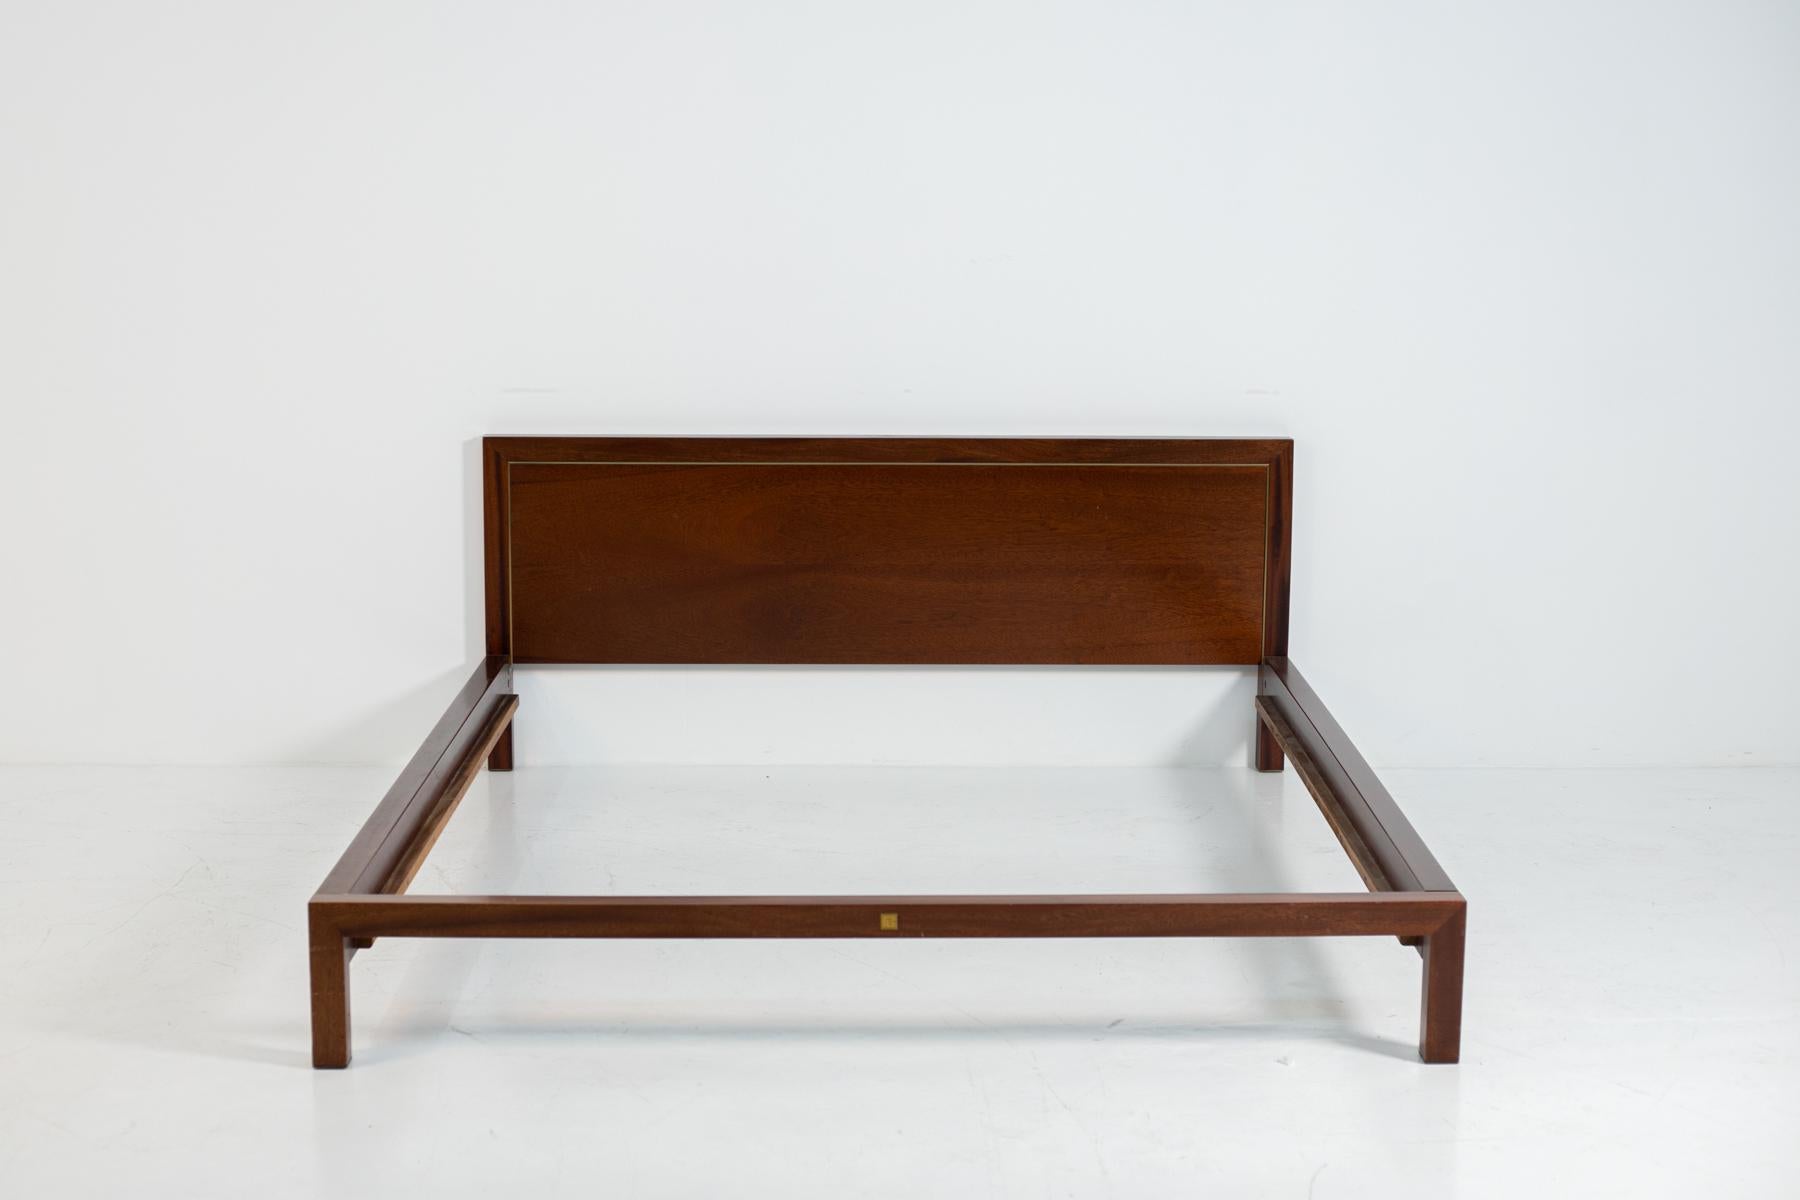 Pierre Balmain Headboard in Wood and Brass, Signed, 1980s For Sale 7